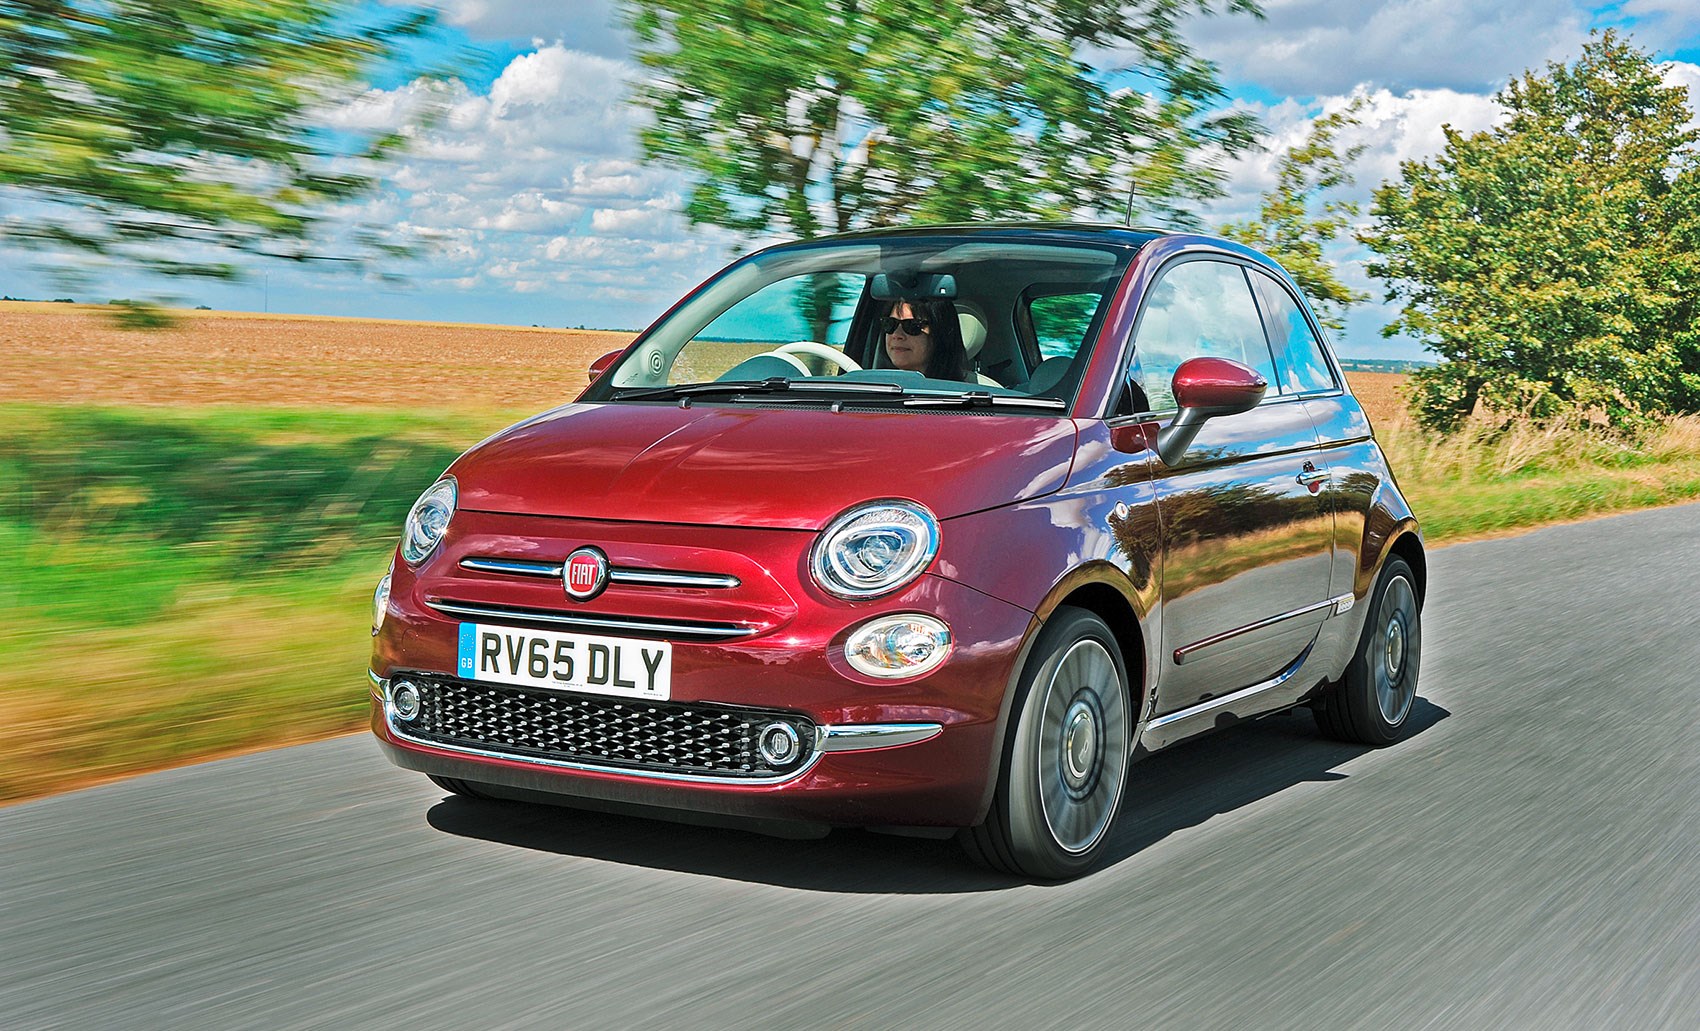 new-fiat-500-reservations-open-for-new-all-electric-fiat-500-hatchback